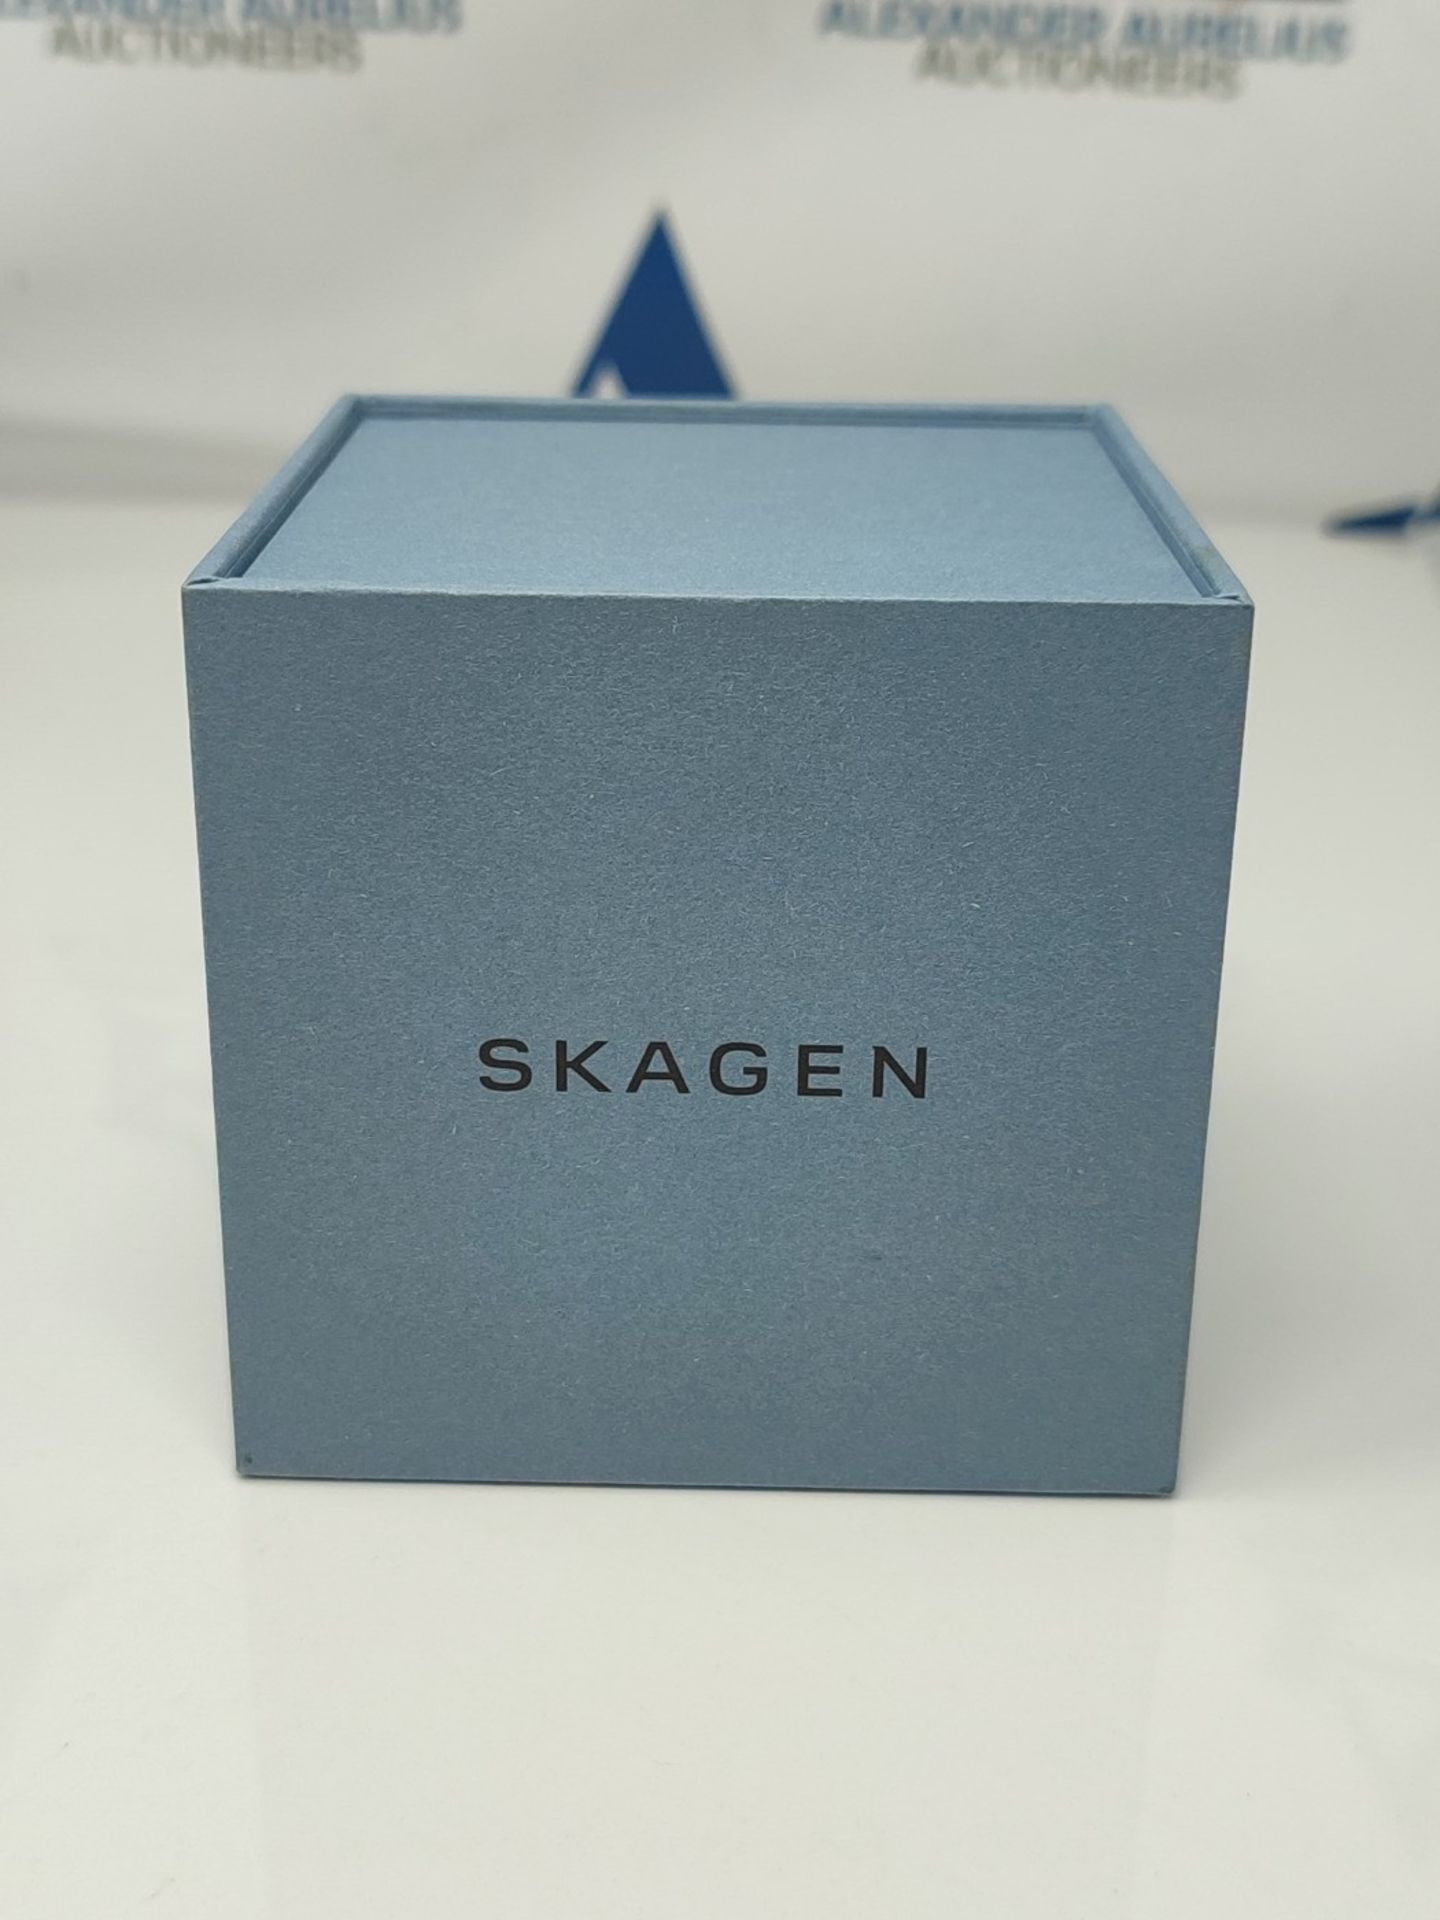 RRP £149.00 Skagen Mens Chronograph Quartz Watch with Leather Strap - Image 2 of 3